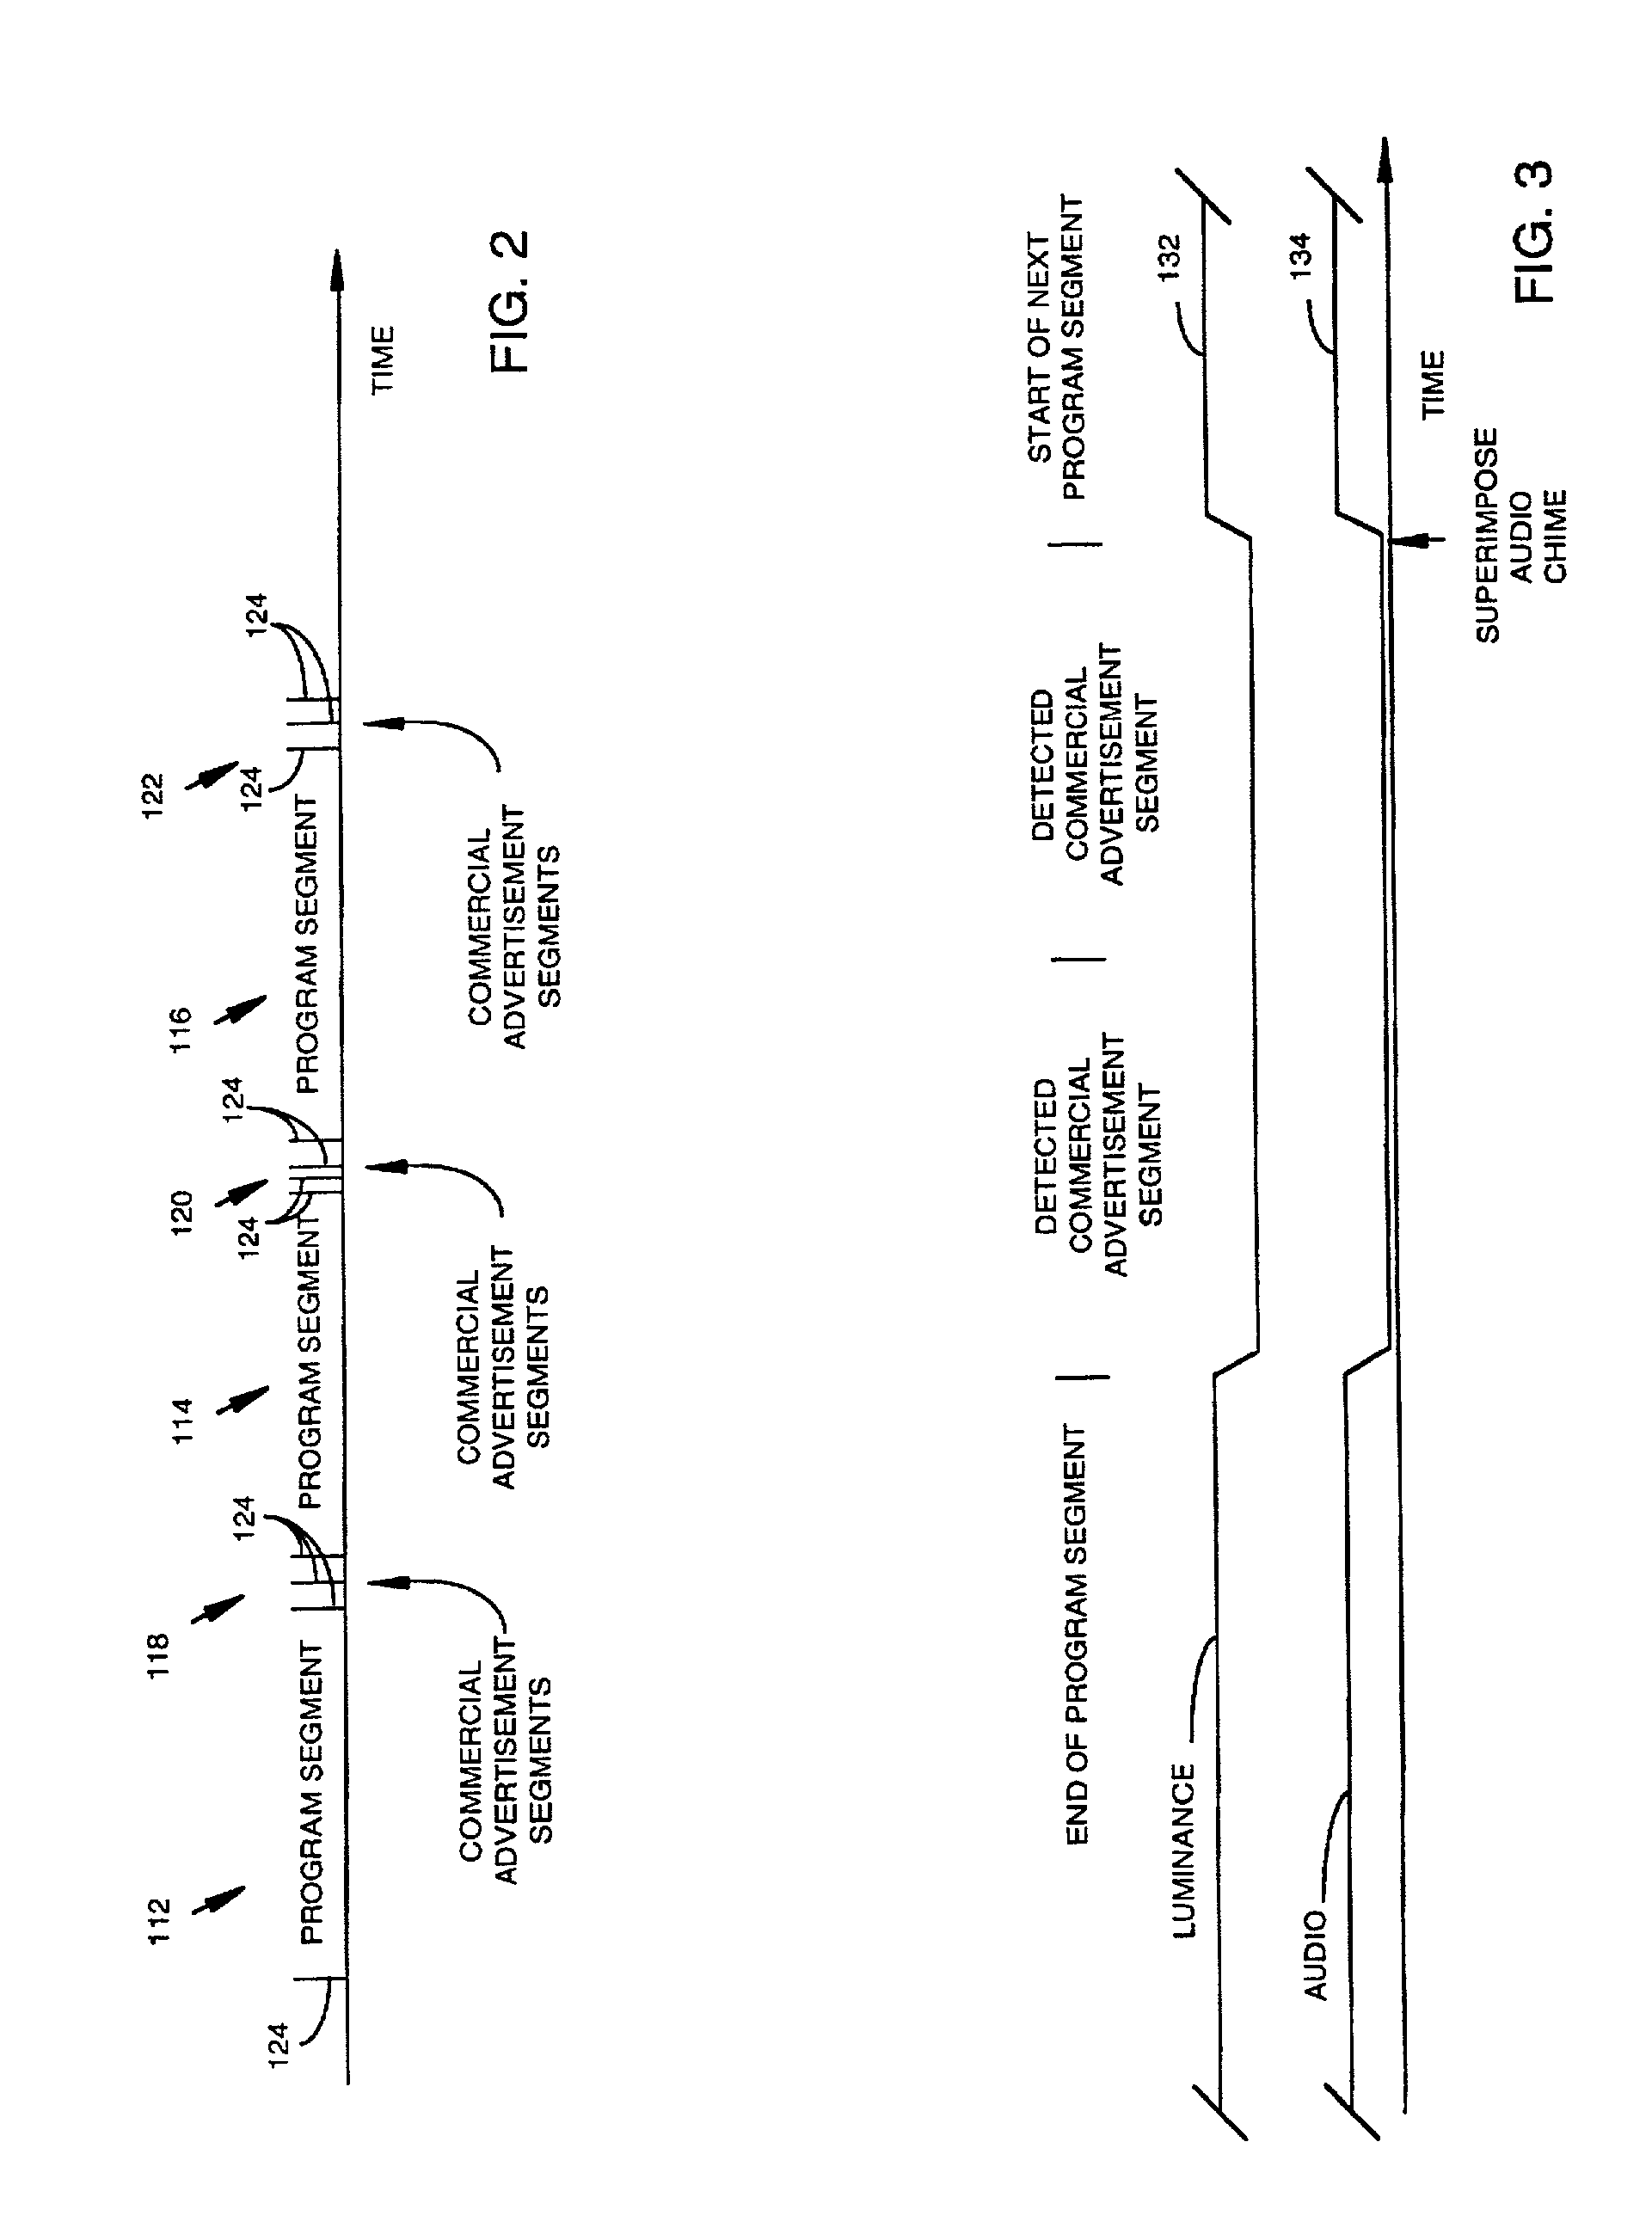 Method and apparatus for controlling a video recorder/player to selectively alter a video signal